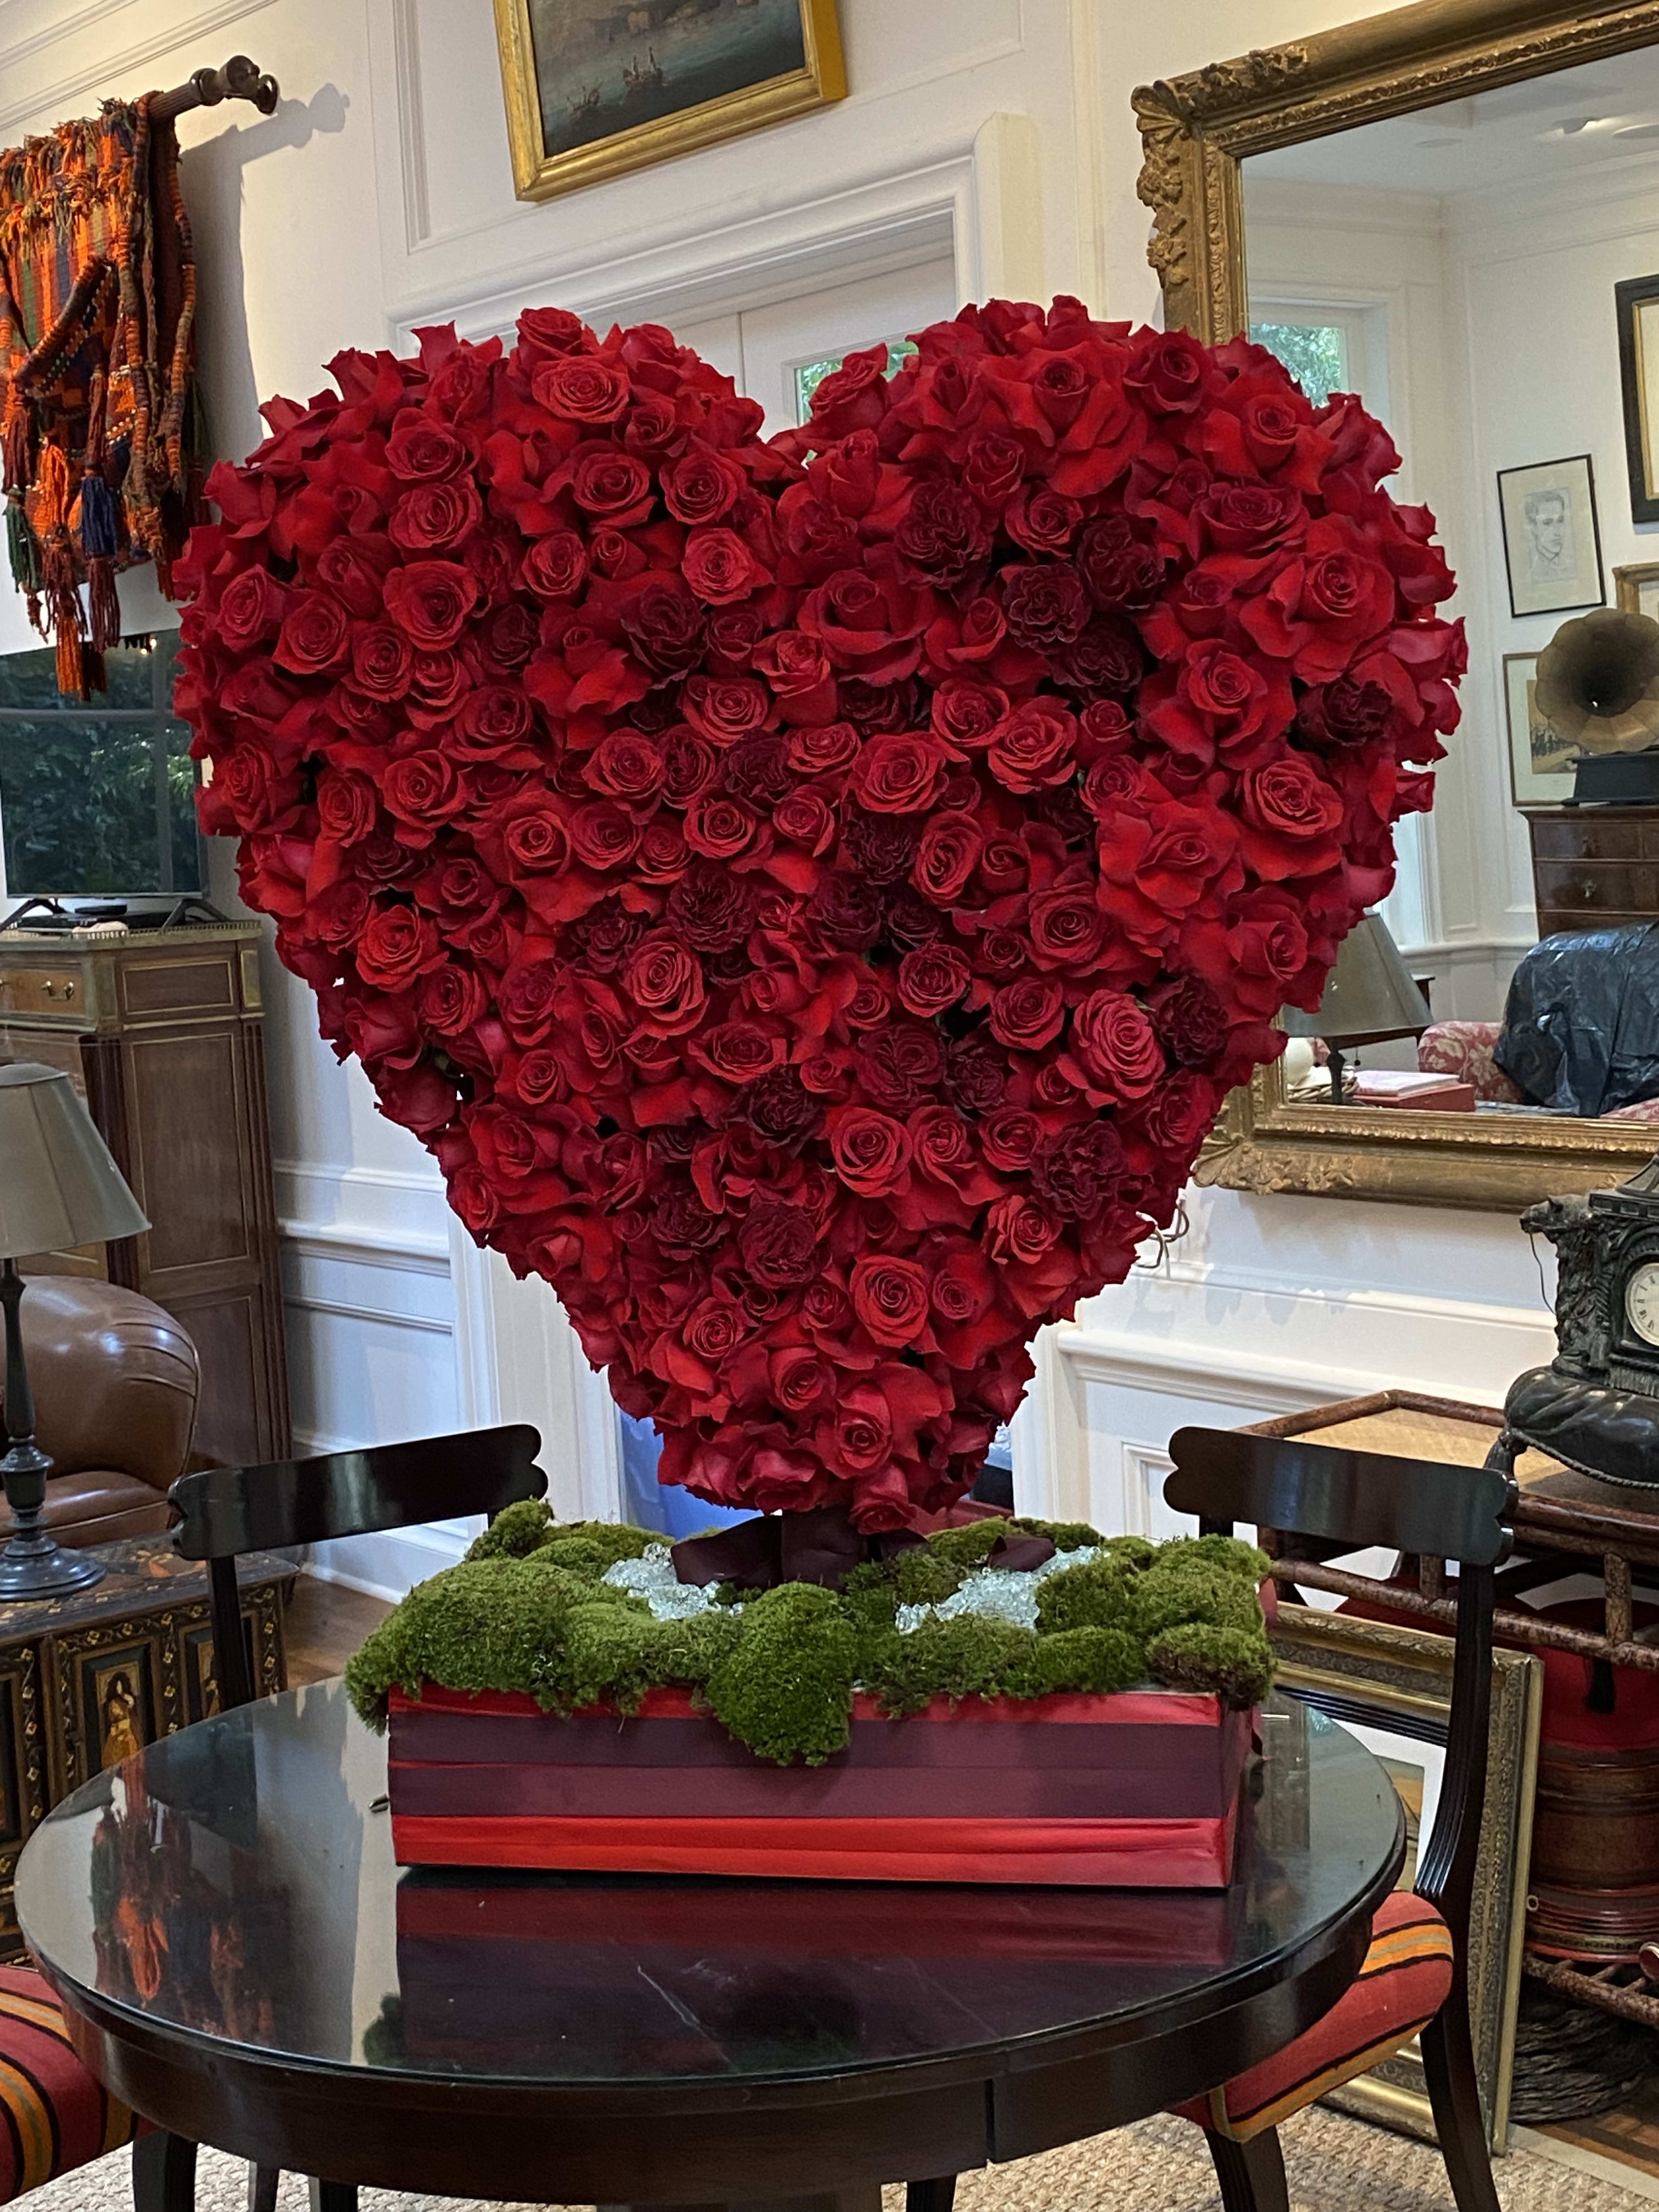 My Lovely Heart - one and only custom built- red rose heart arrangement to show a loved one how much you care for them! This comes with lots of lush red roses, orchids on a display stand